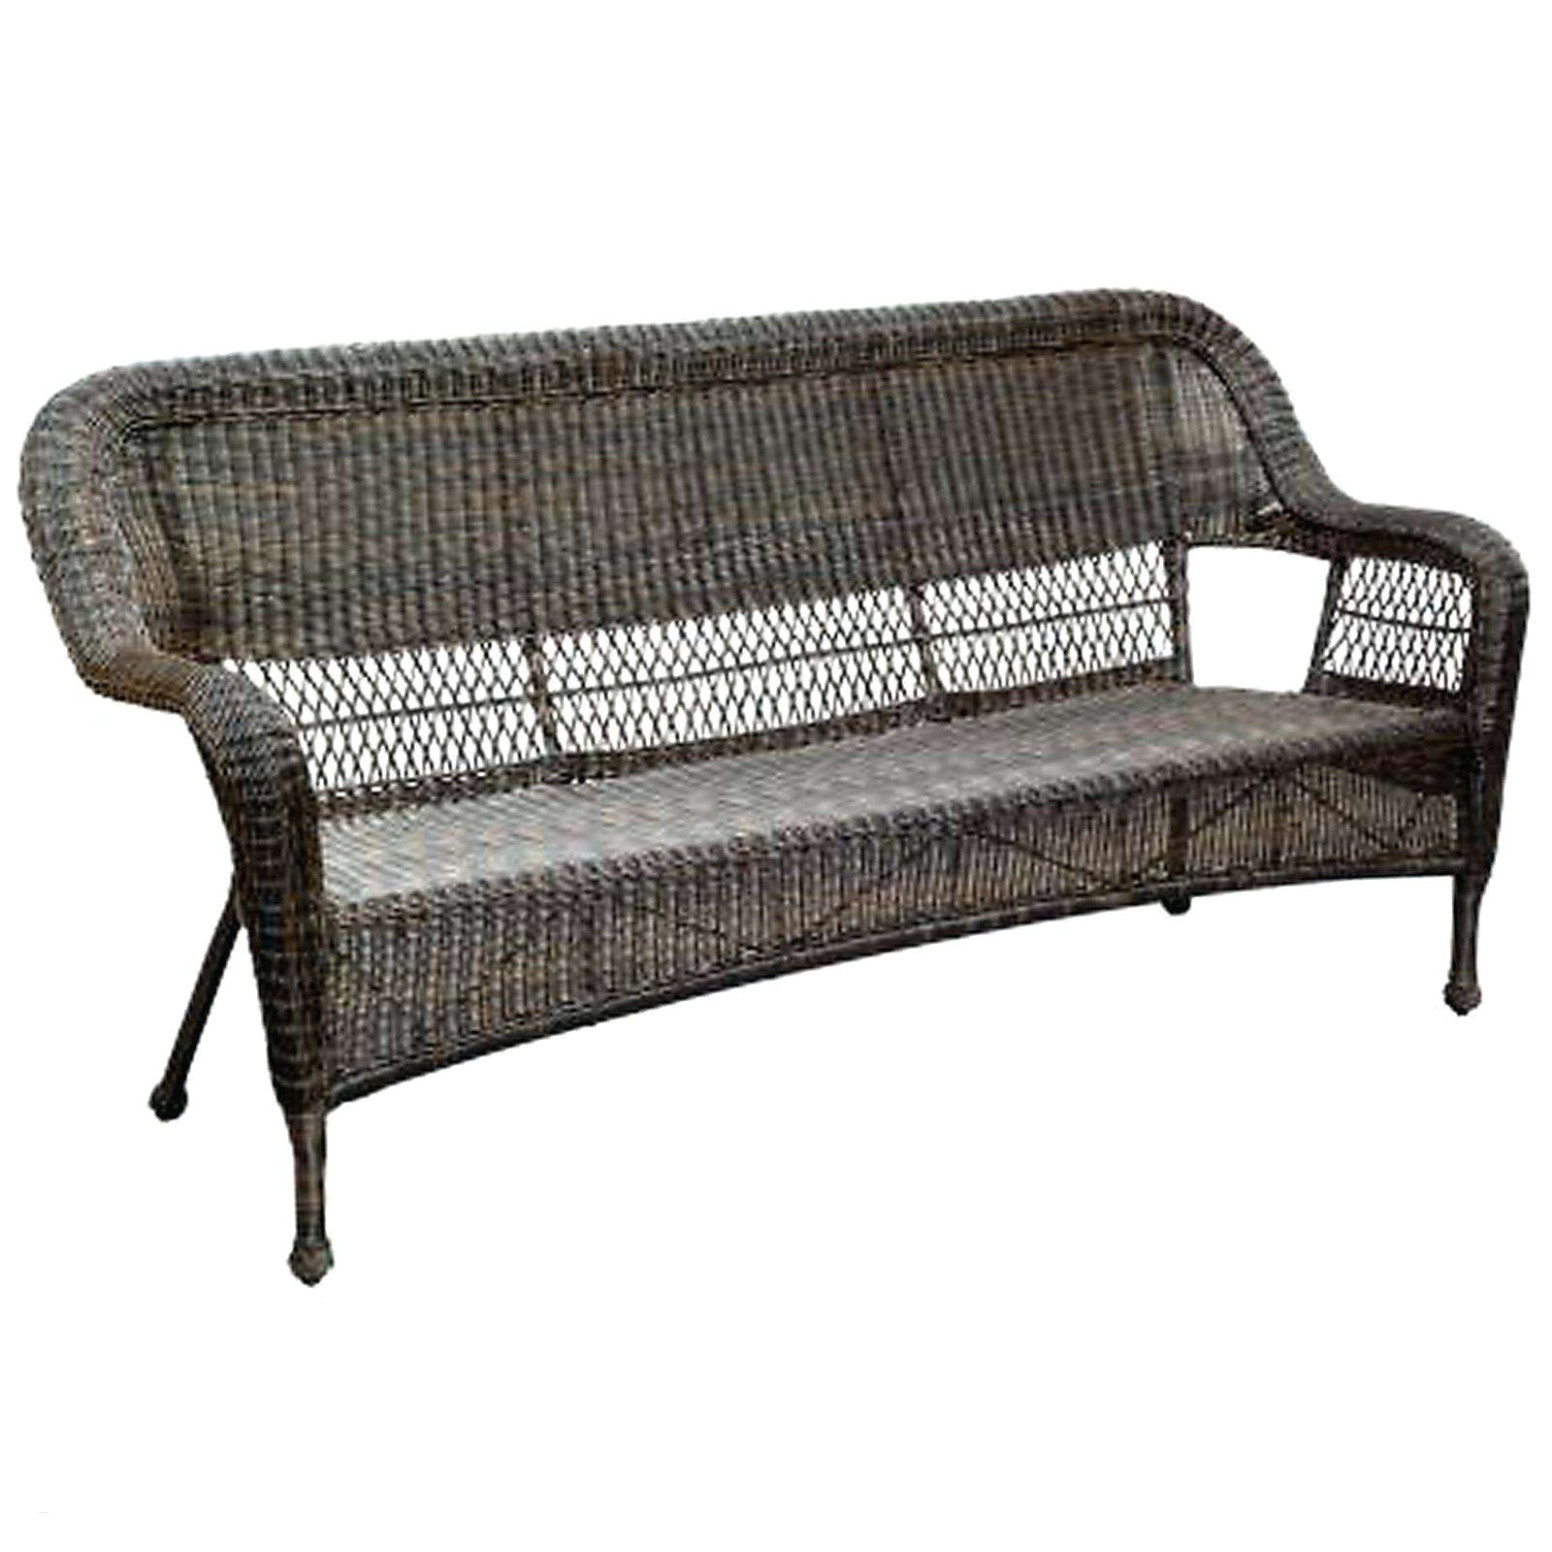 outdoor chaise lounge cushions unique wicker outdoor sofa 0d patio chairs sale replacement cushions ideas